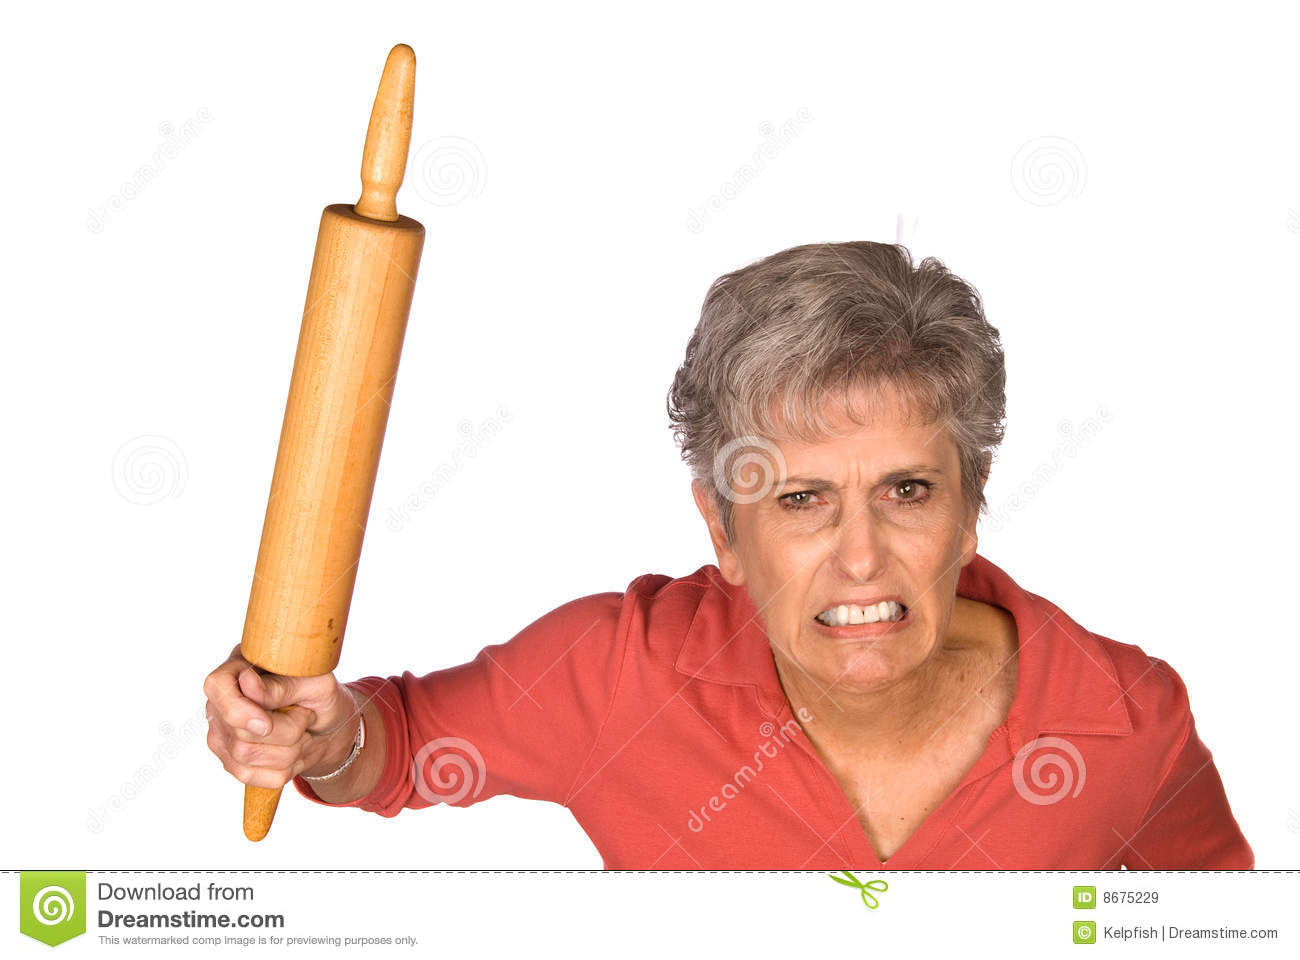 An Angry Grandmother Is Ready To Swing Her Rolling Pin To Fend Off